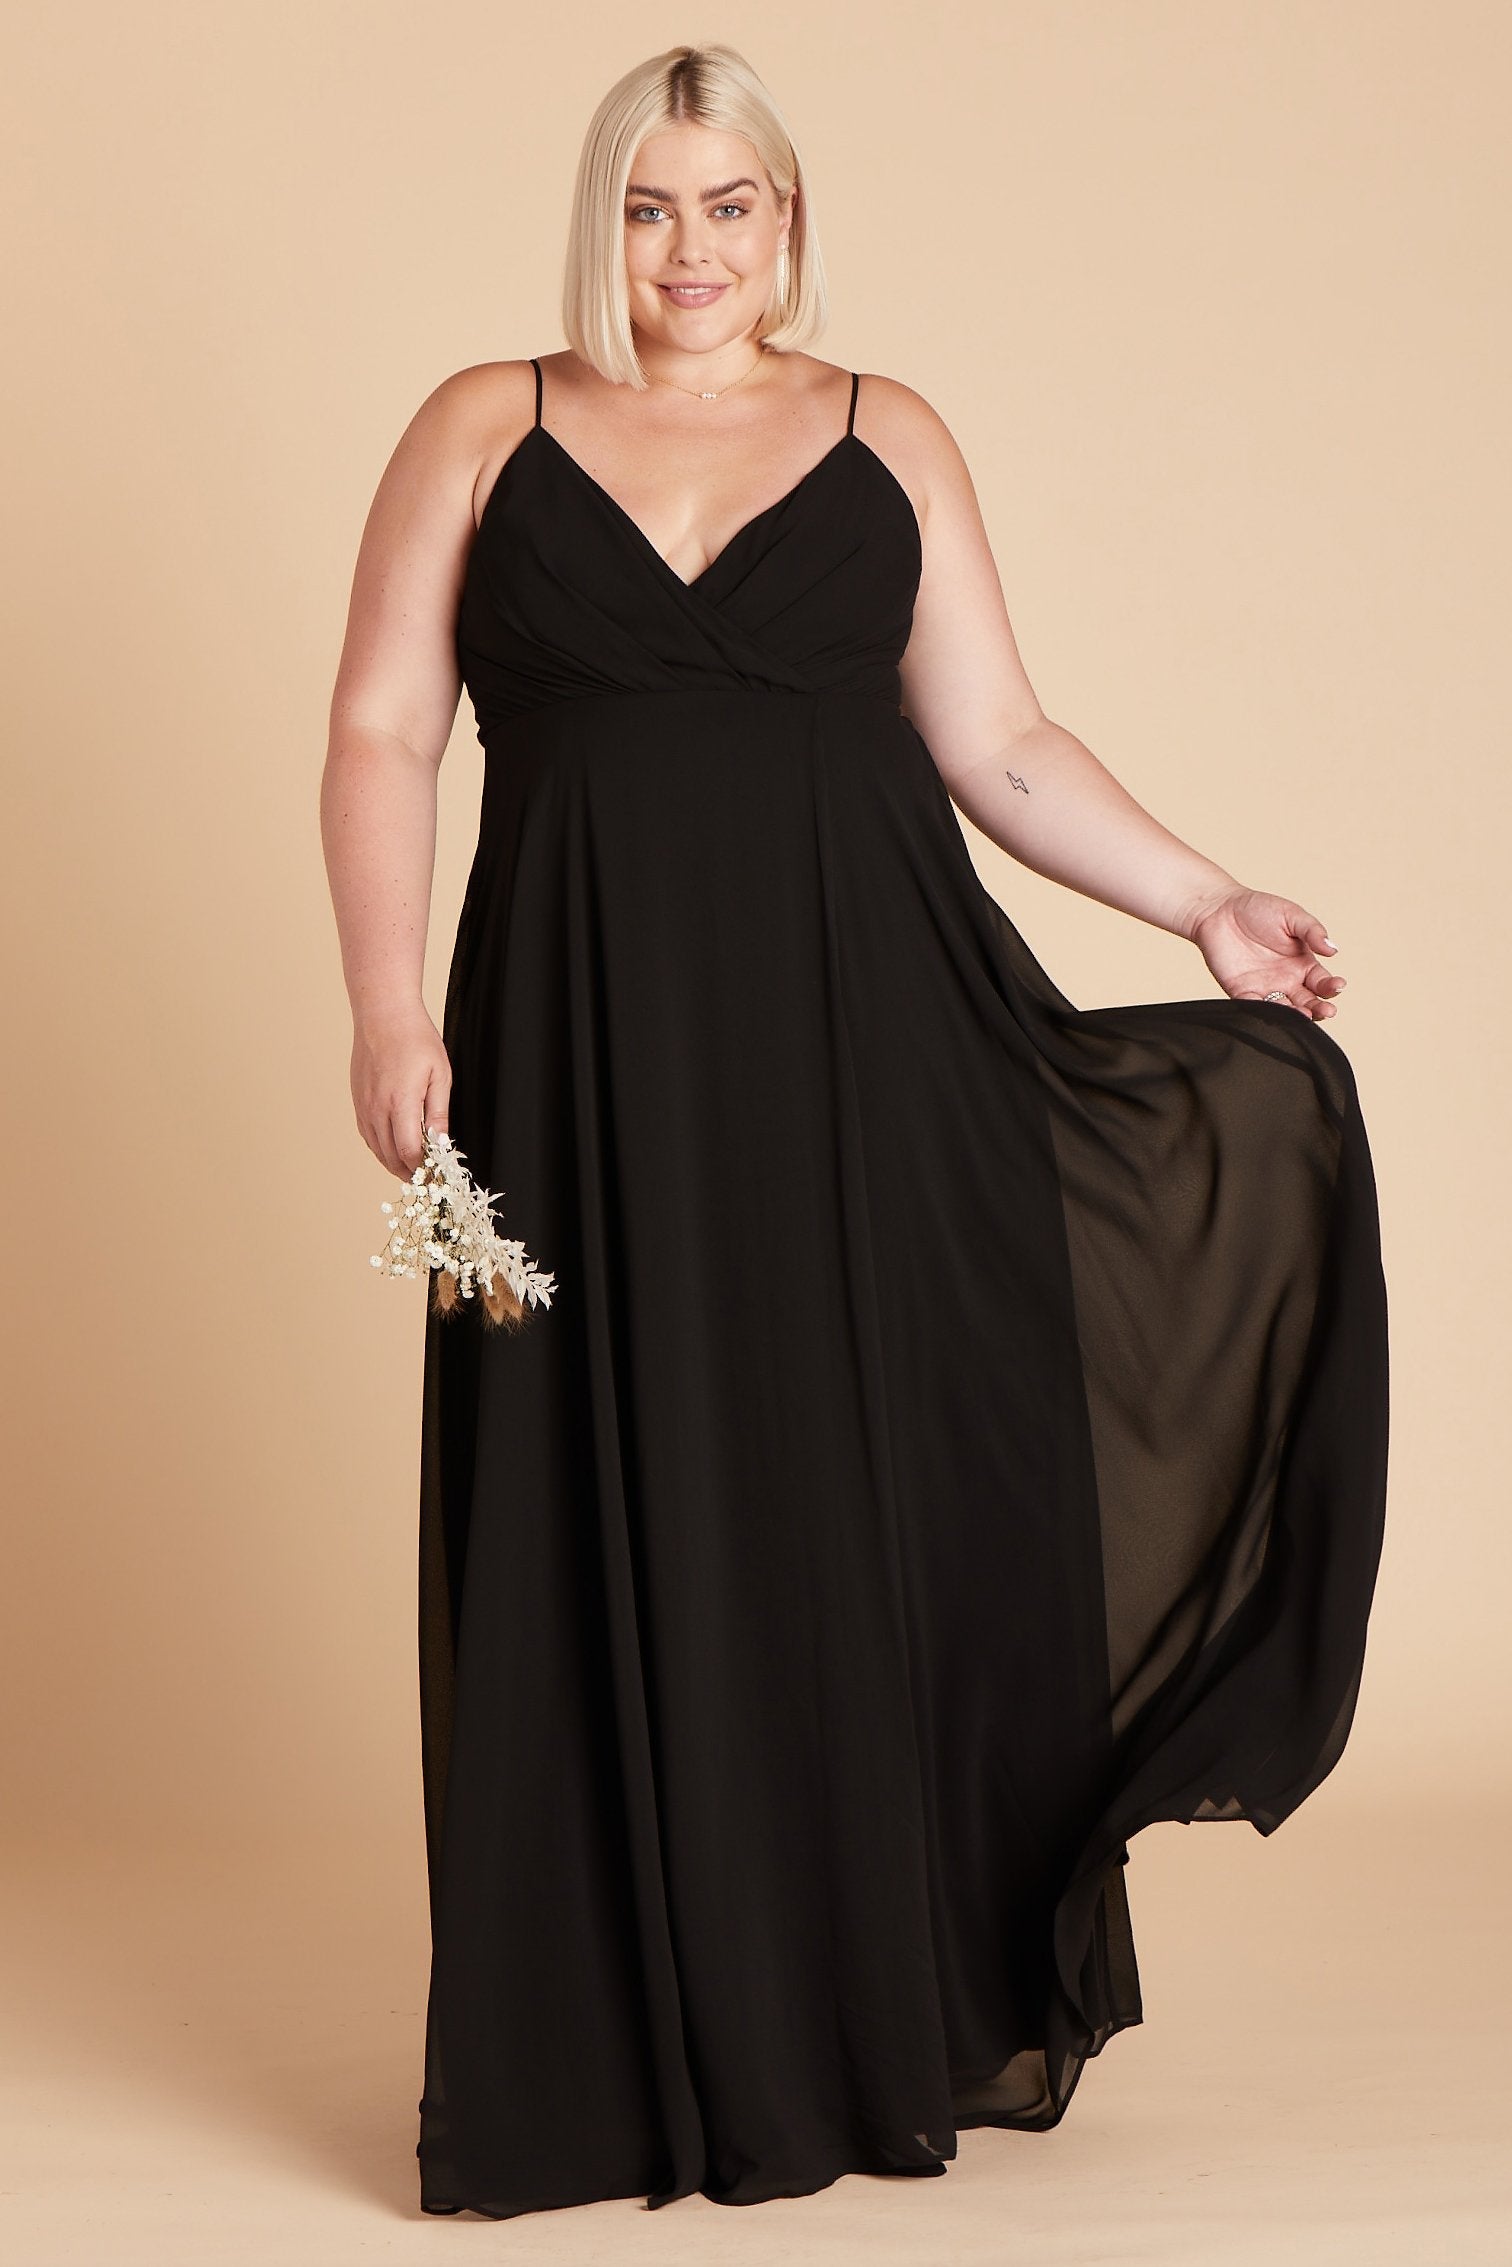 Kaia plus size bridesmaids dress in black chiffon by Birdy Grey, front view